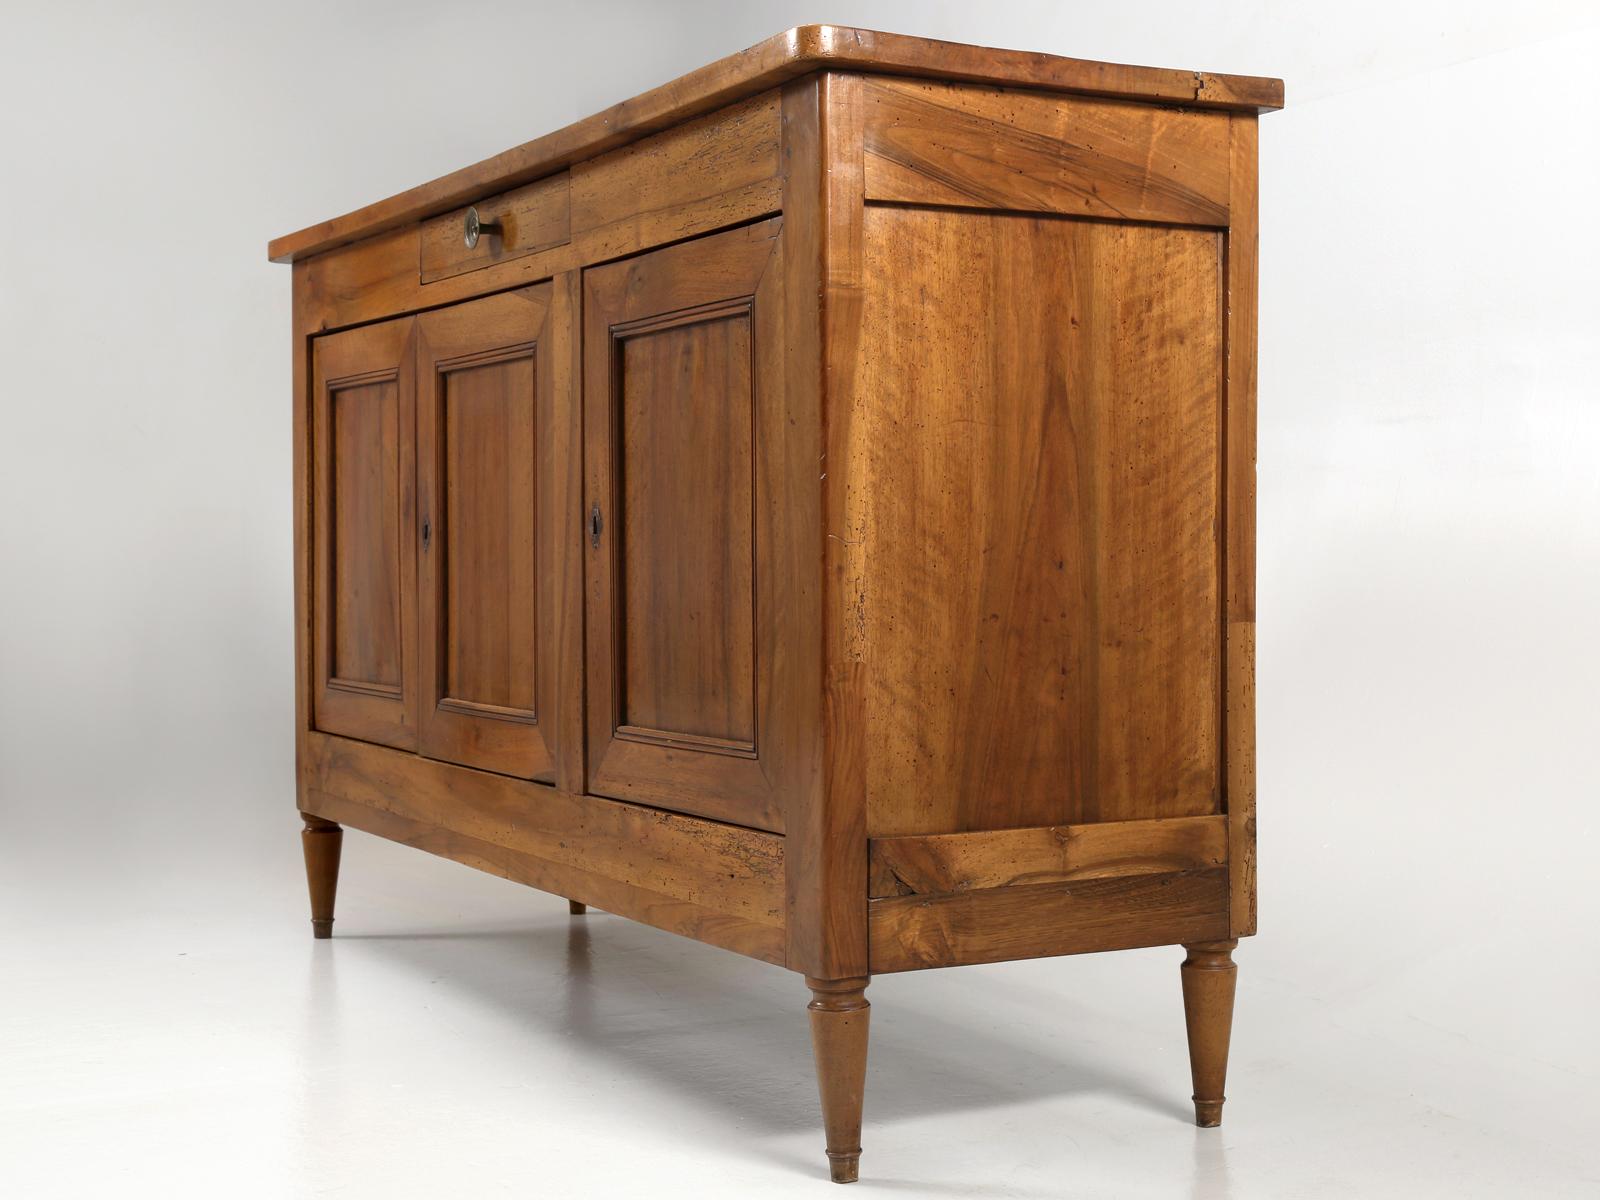 Antique French walnut Directoire style buffet, that has been sympathetically restored. Structurally, because of how old this French Directoire buffet is, we had to disassemble the entire cabinet and restore all the joints, while at the same time,